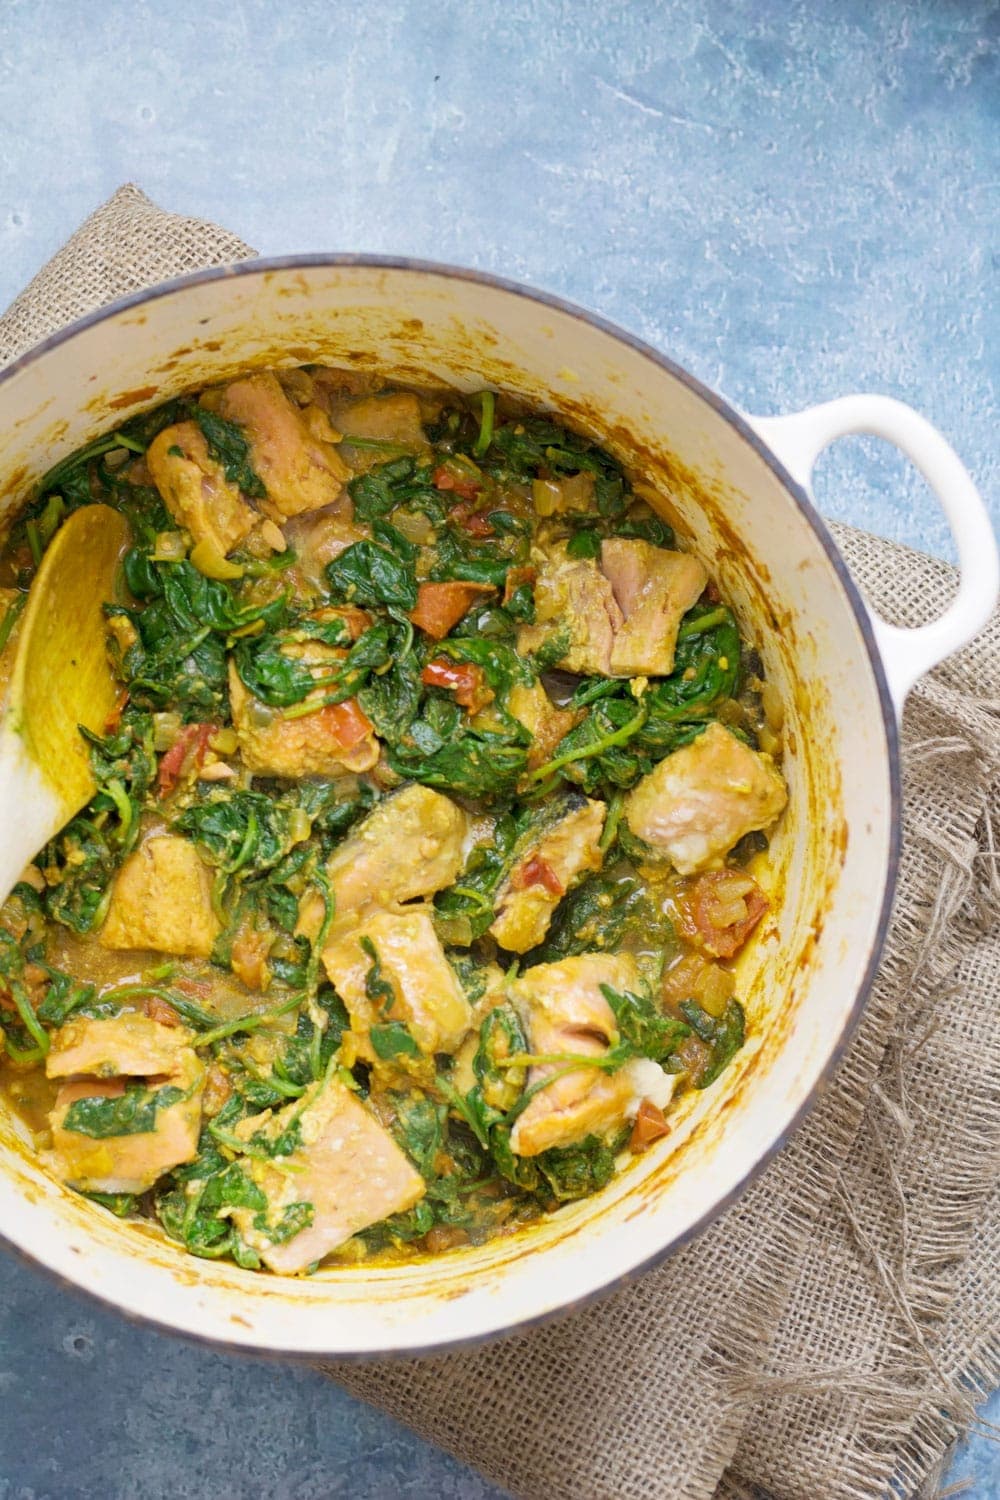 Salmon and tomato curry is a tasty change from a traditional curry recipe. Not only that but the spinach, tomato and salmon make it a healthier option too!